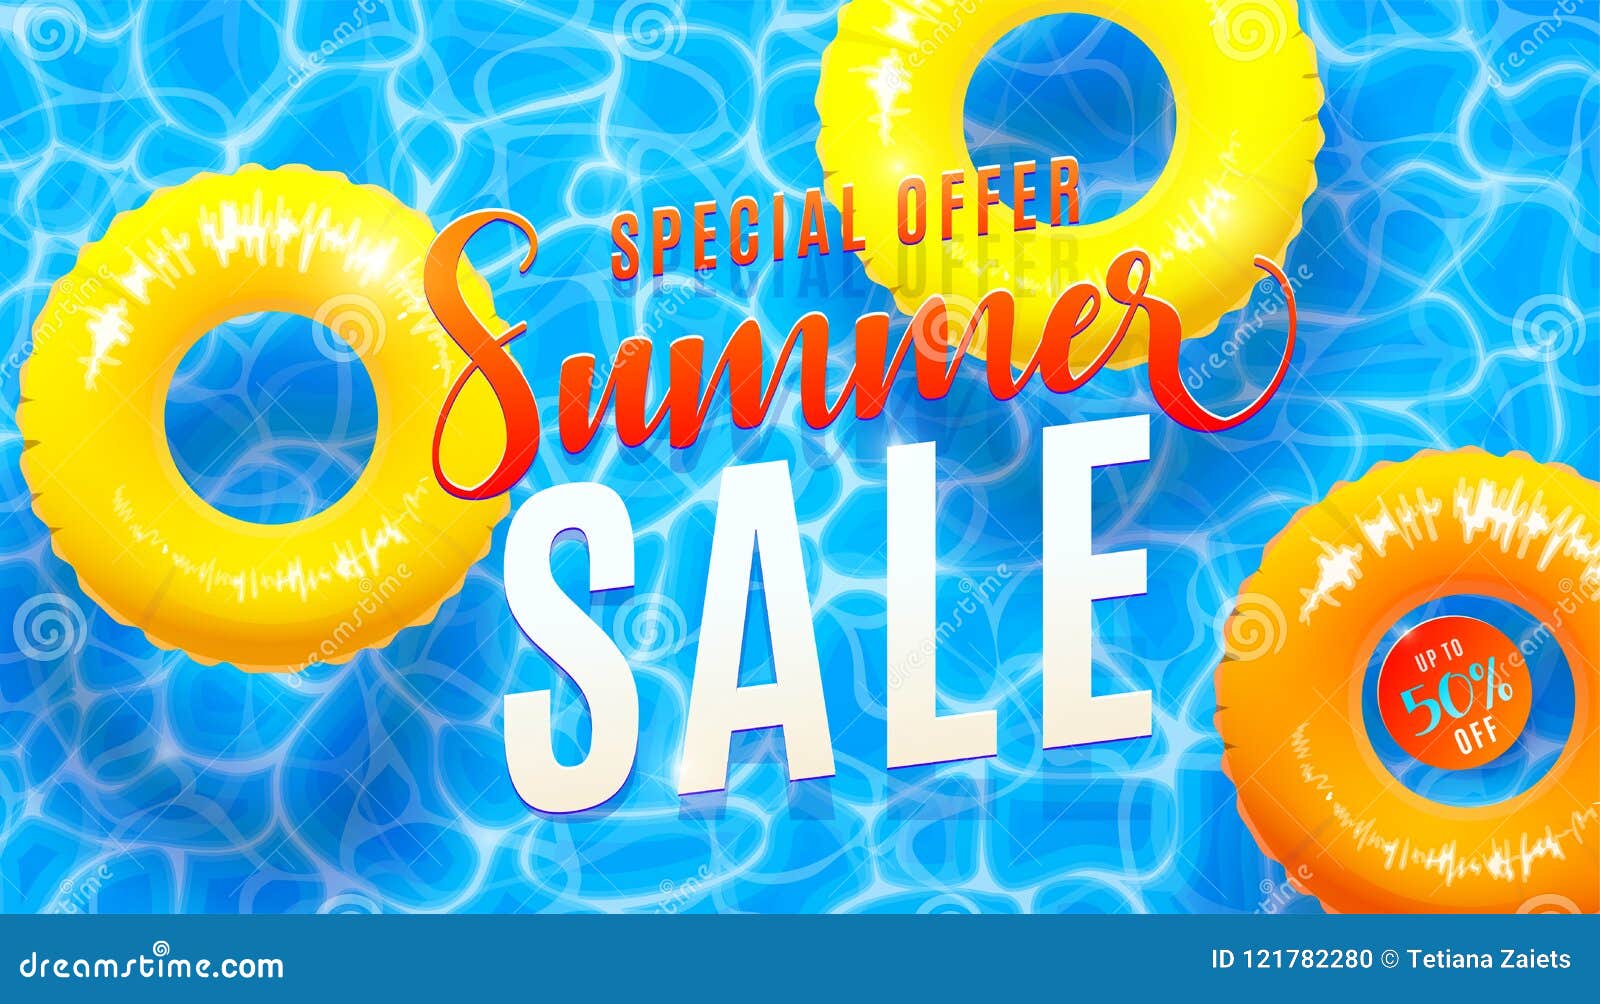 summer sale banner background with blue water texture and yellow pool float.   of sea beach offer